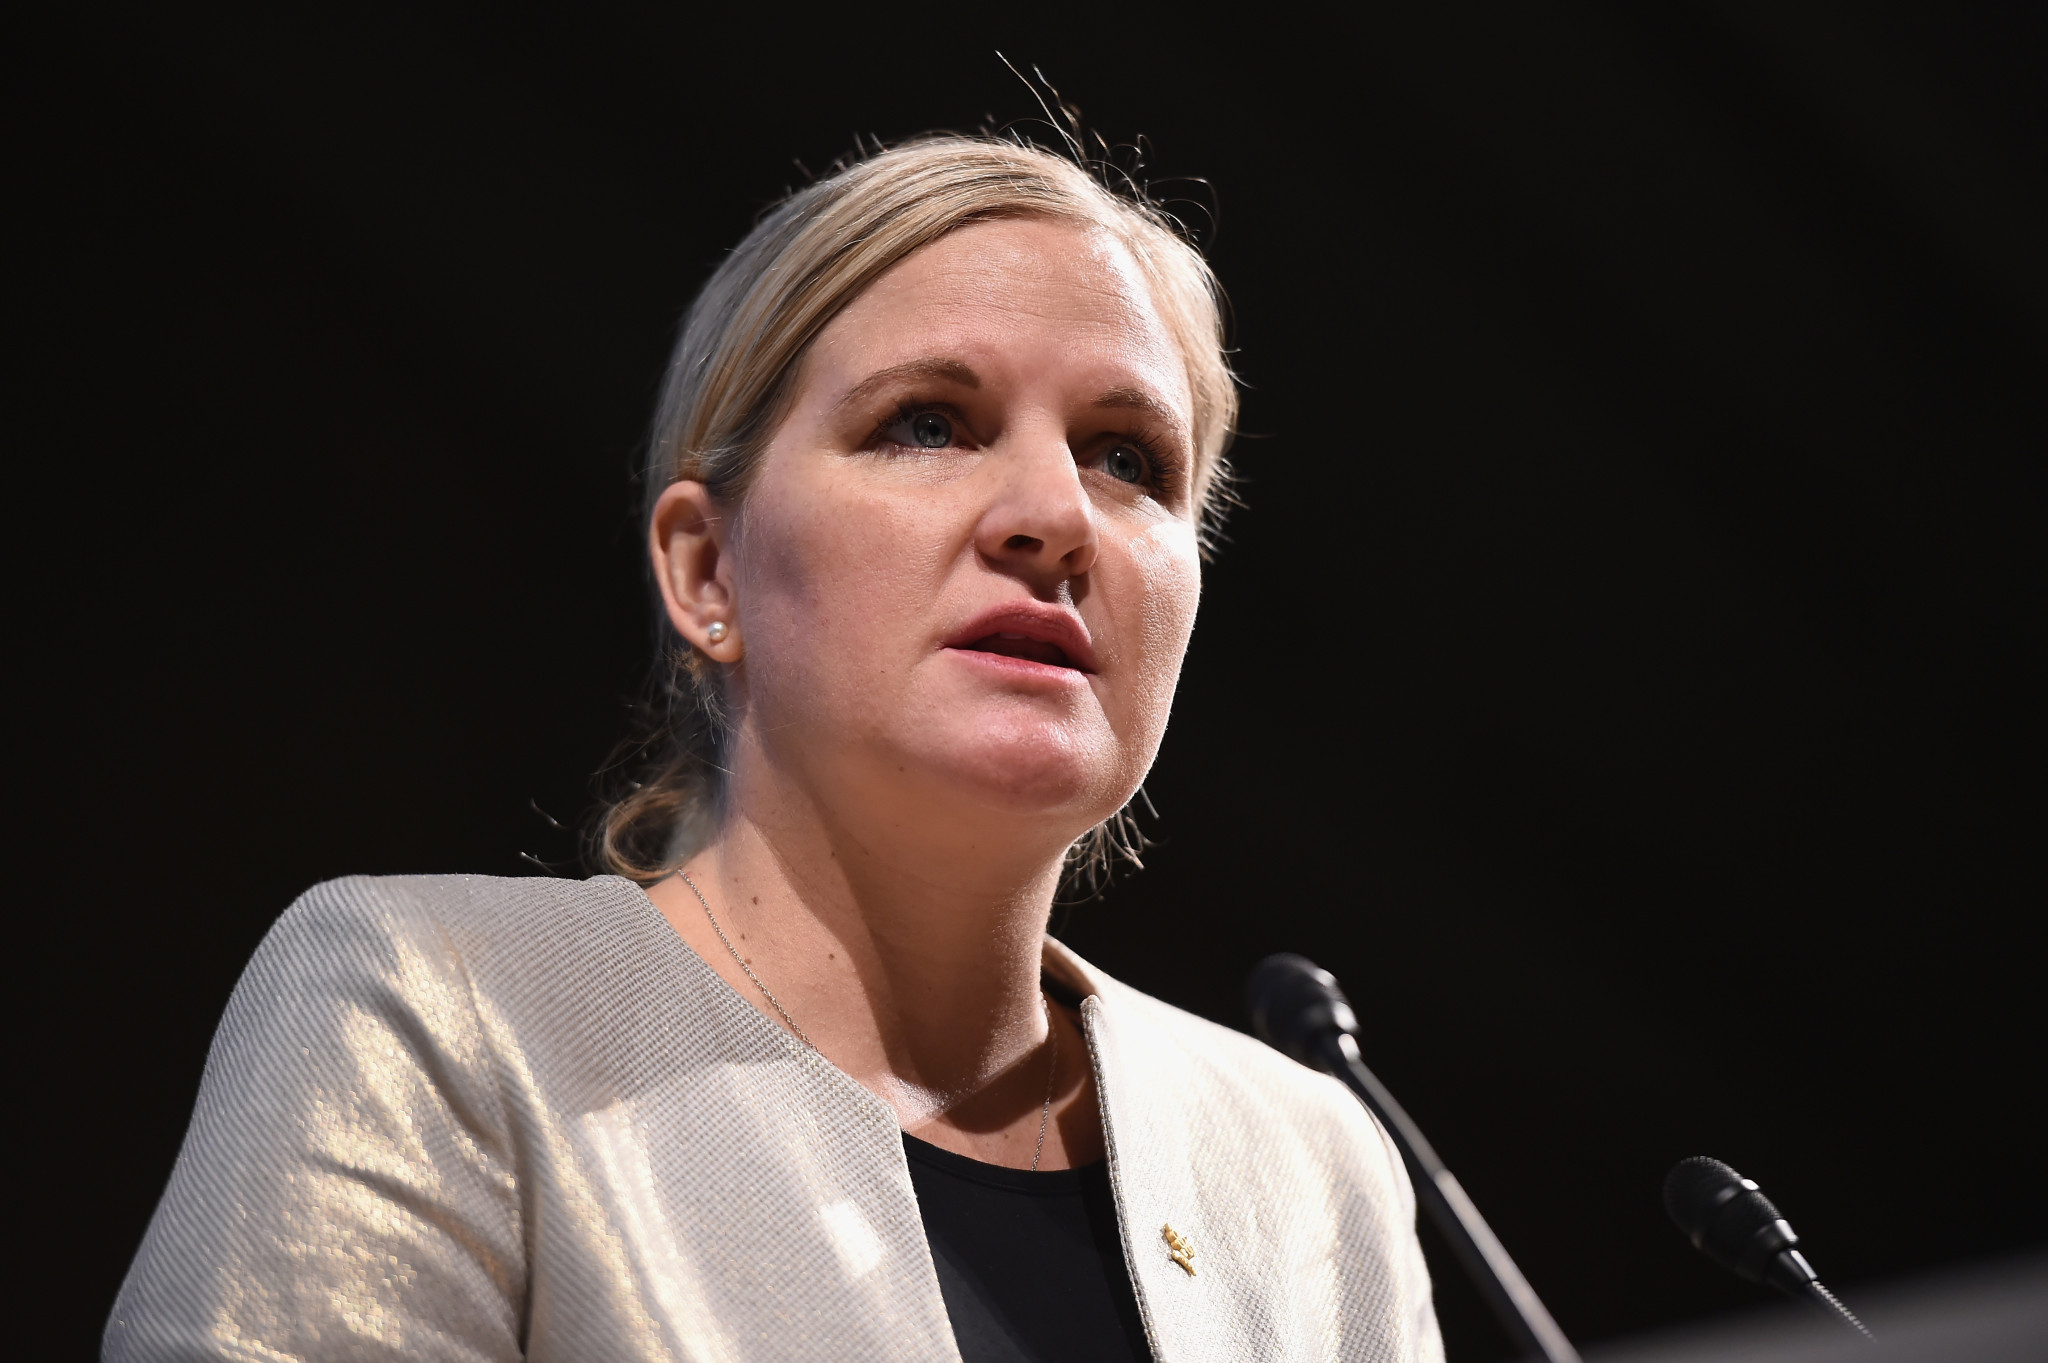 IOC Athletes' Commission chairperson Kirsty Coventry said the athlete world is 